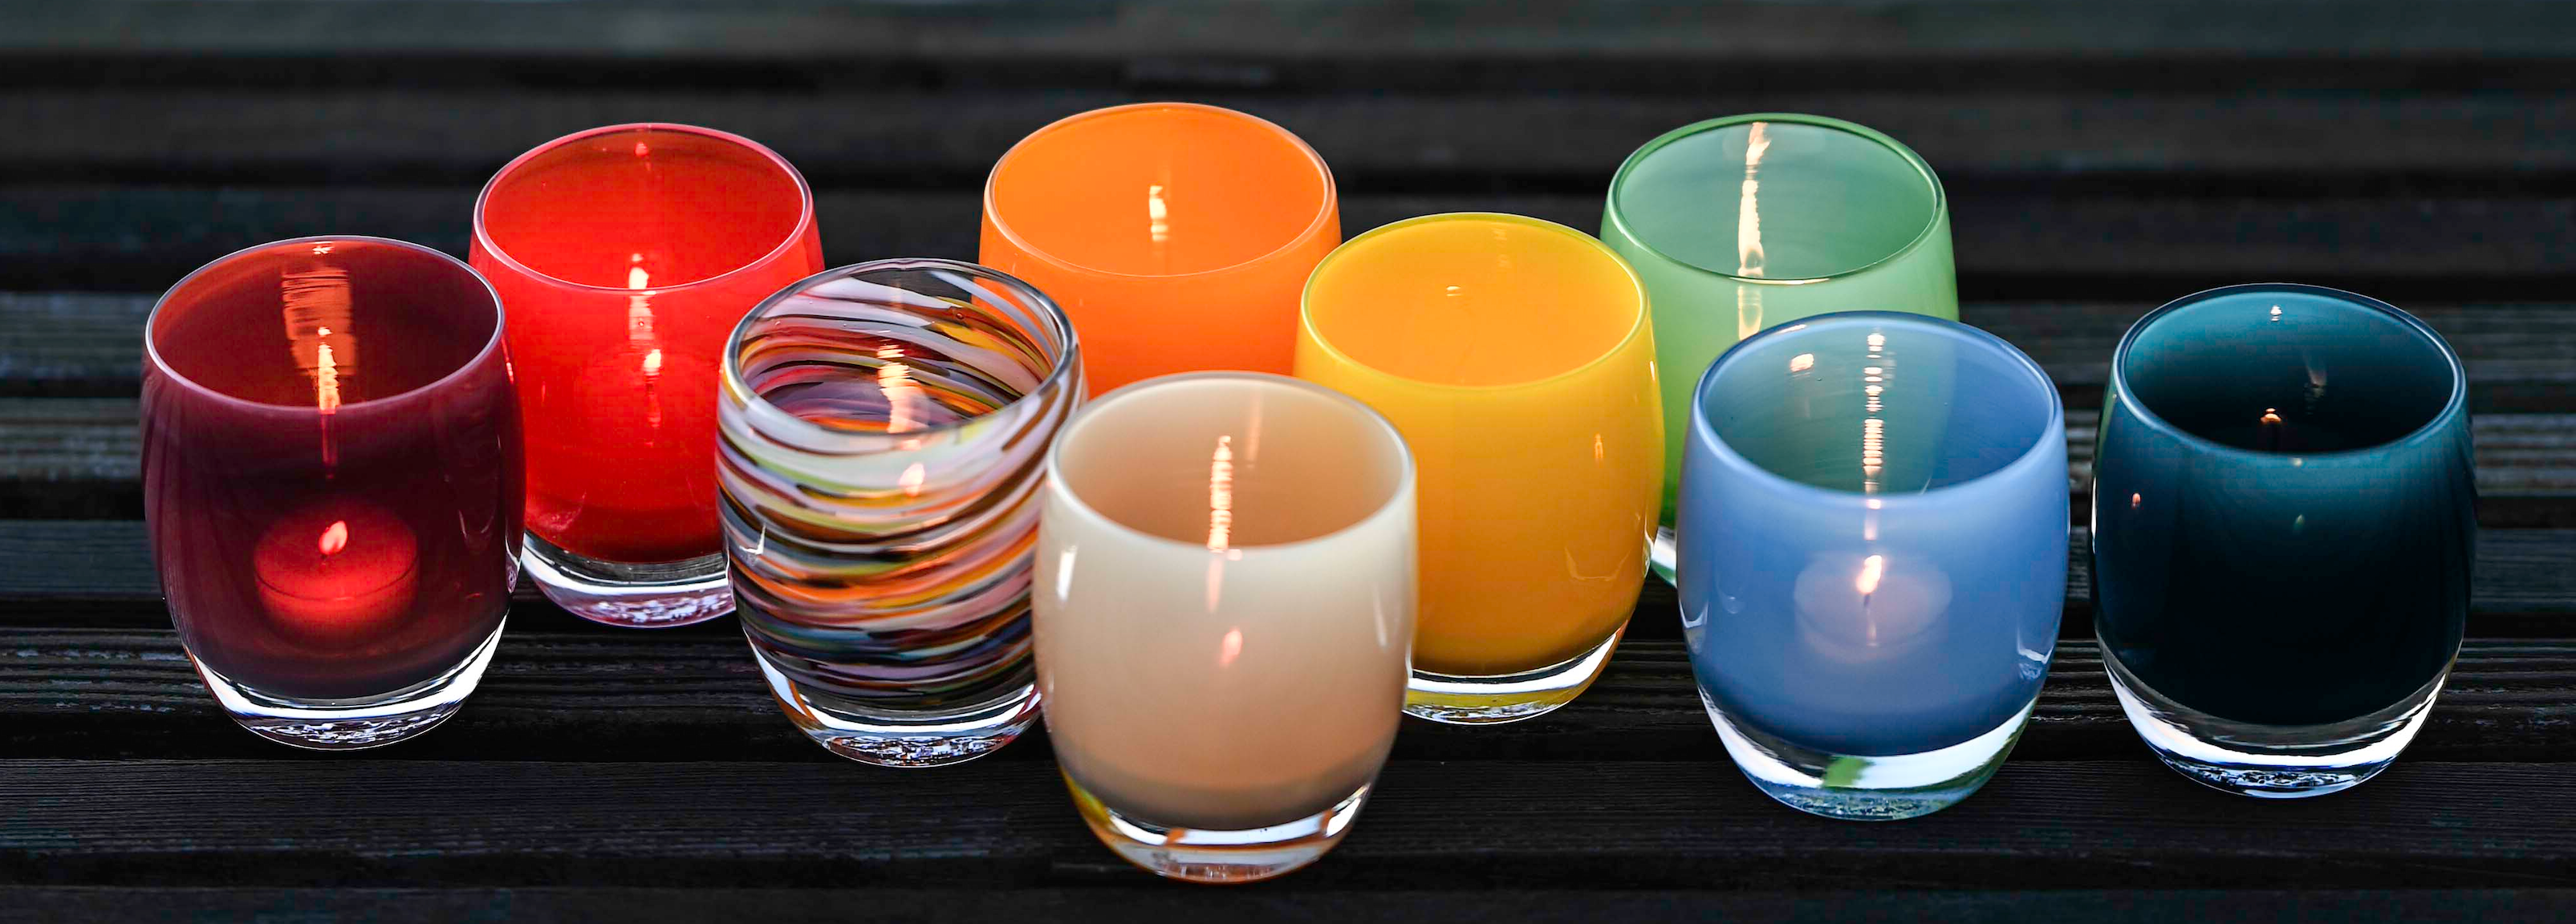 colorful spectrum of hand-made glass votive candle holders